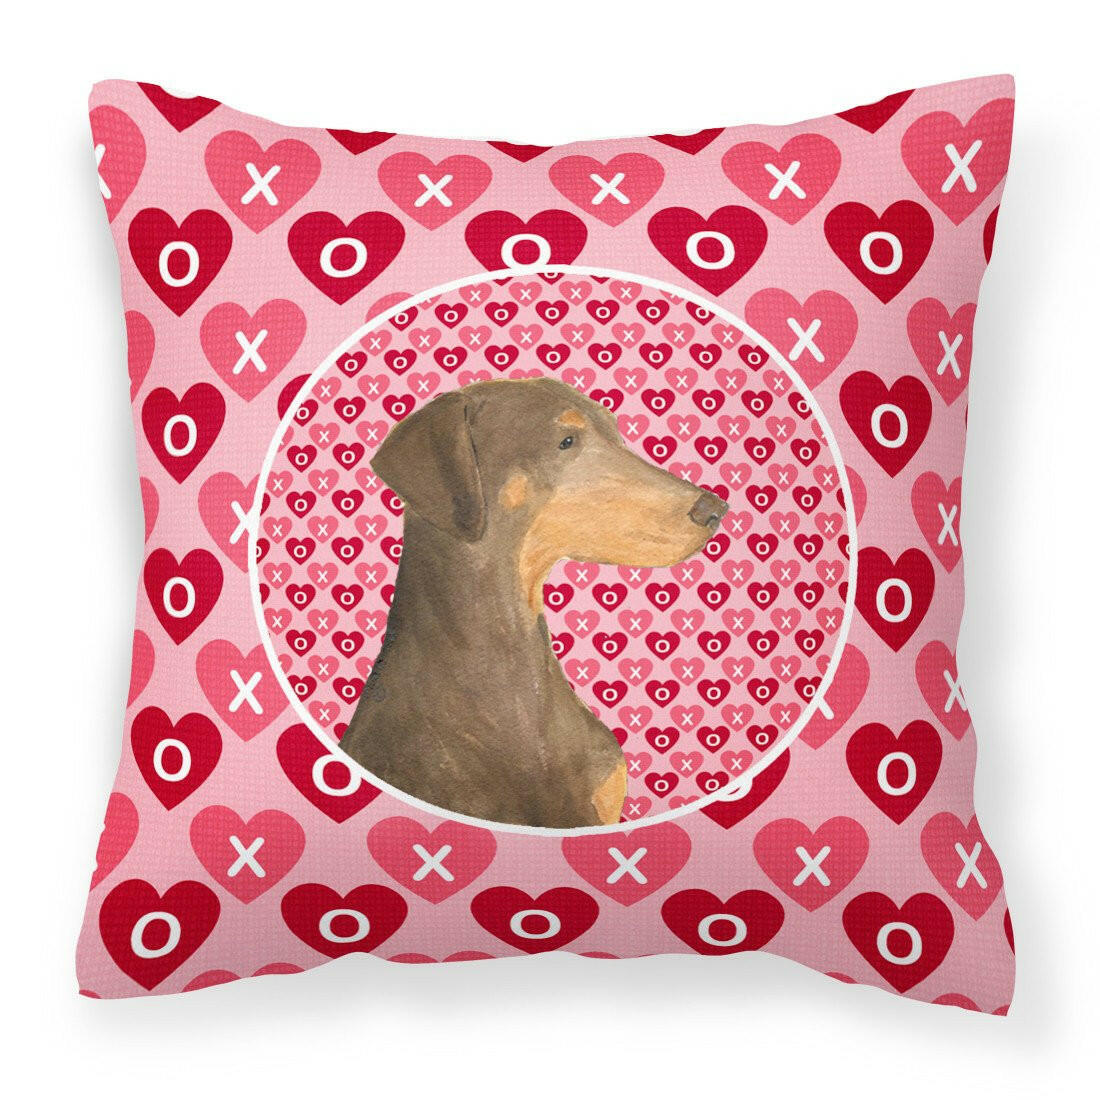 Doberman Hearts Love and Valentine's Day Portrait Fabric Decorative Pillow SS4479PW1414 by Caroline's Treasures